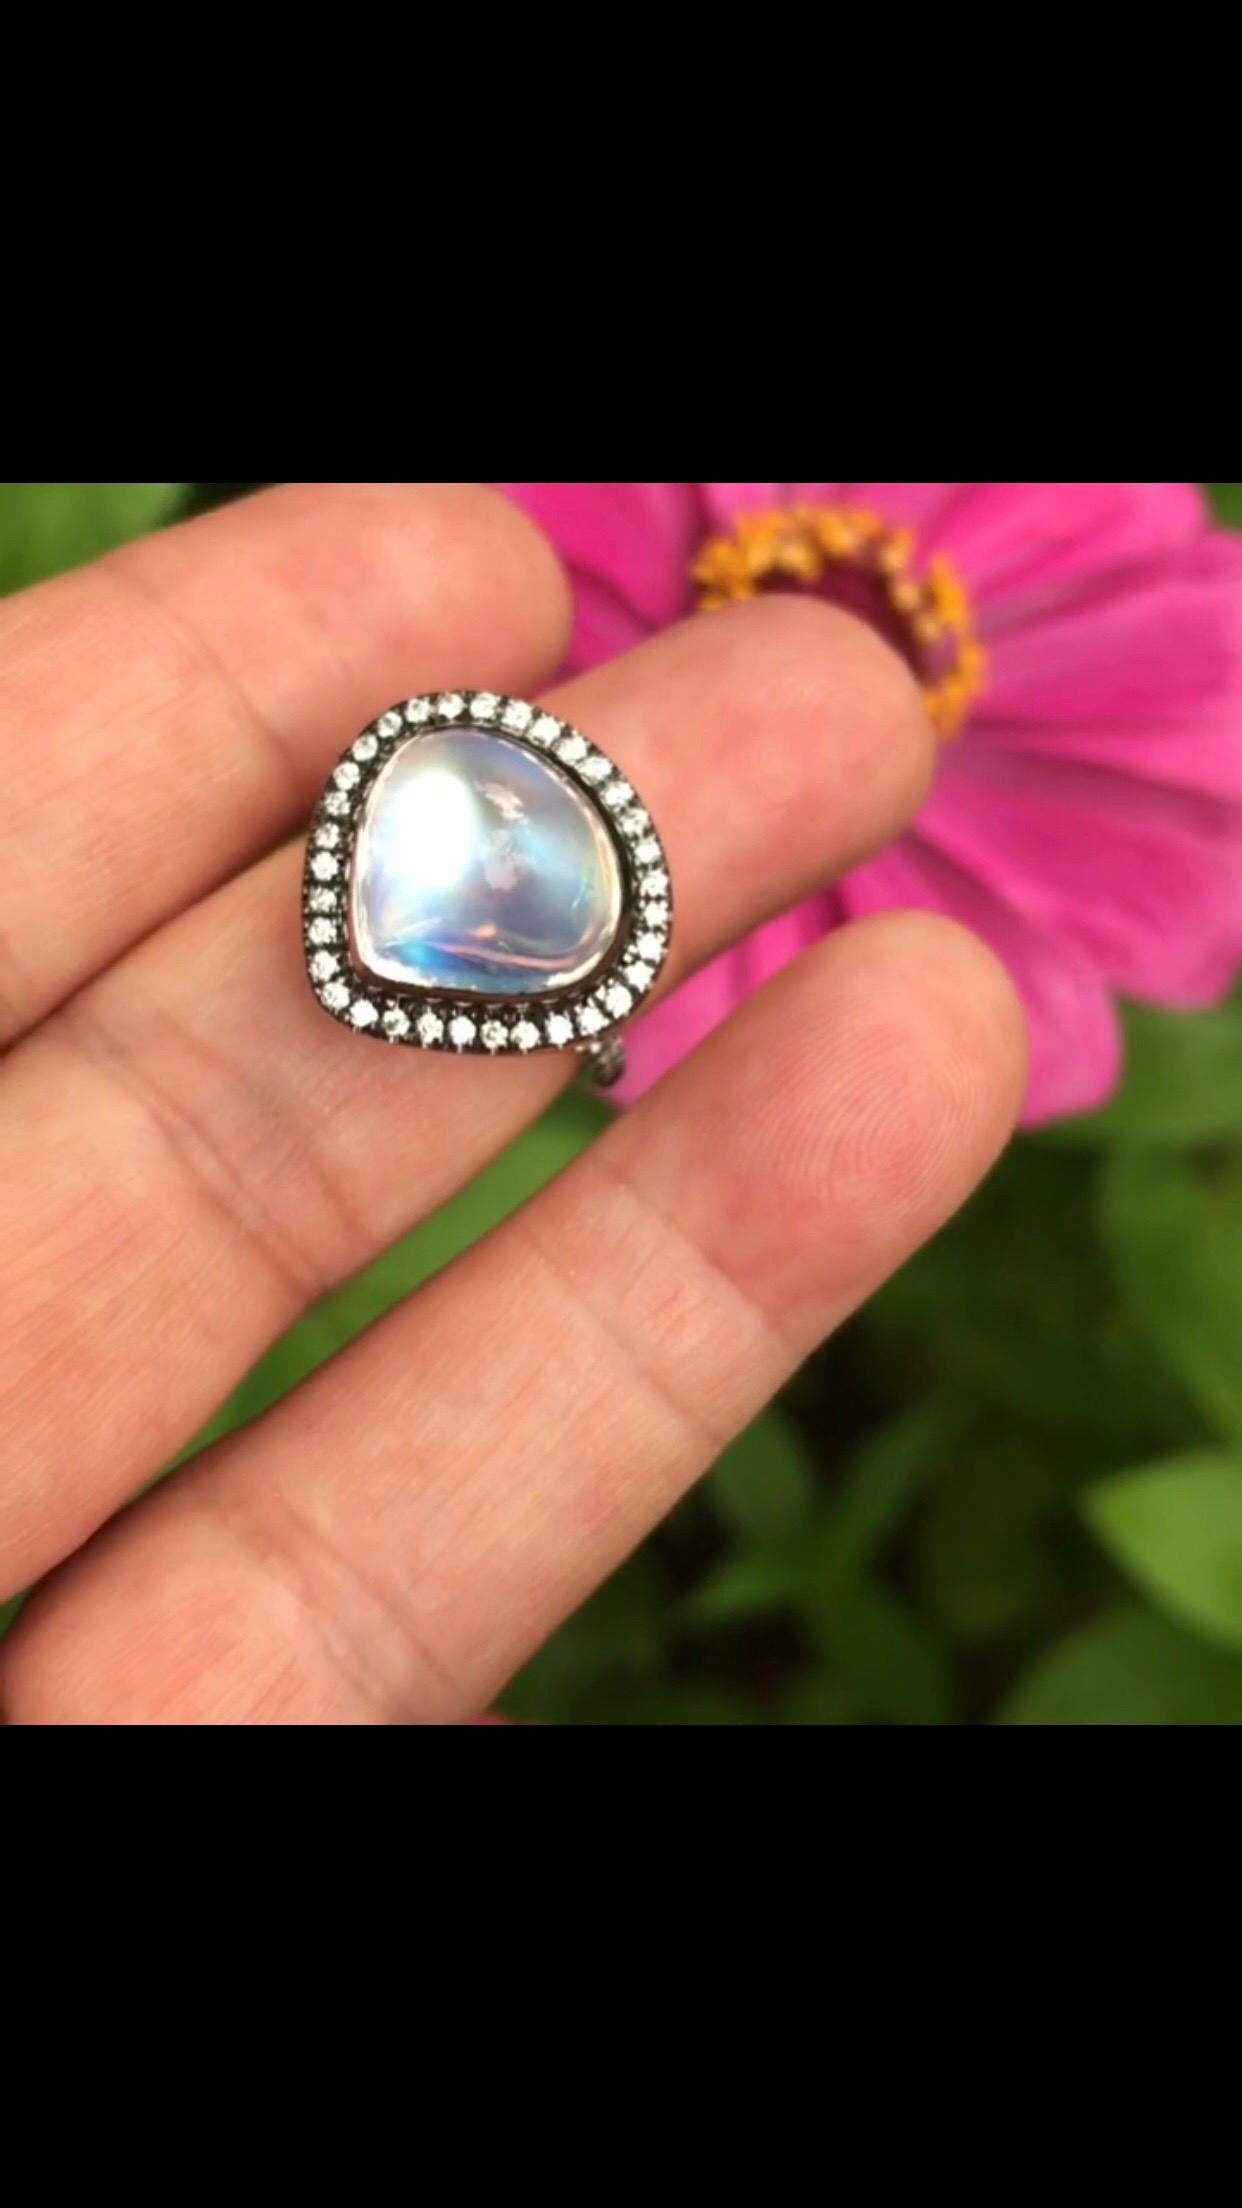 Statement Royal Blue Moonstone Ring with Diamond Accent 1